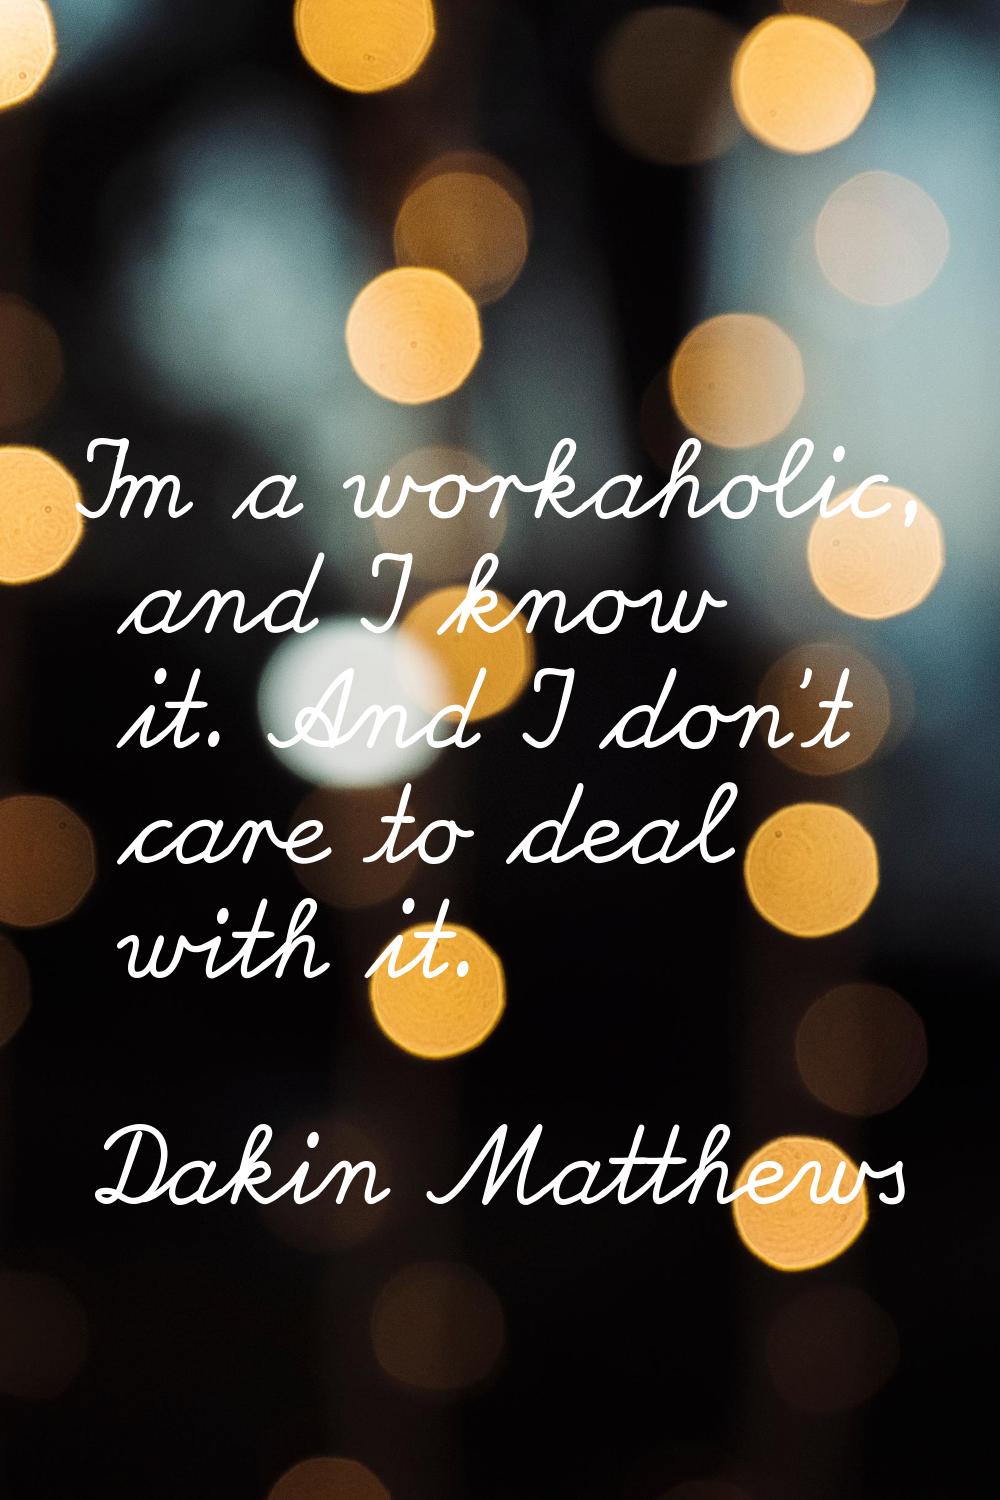 I'm a workaholic, and I know it. And I don't care to deal with it.